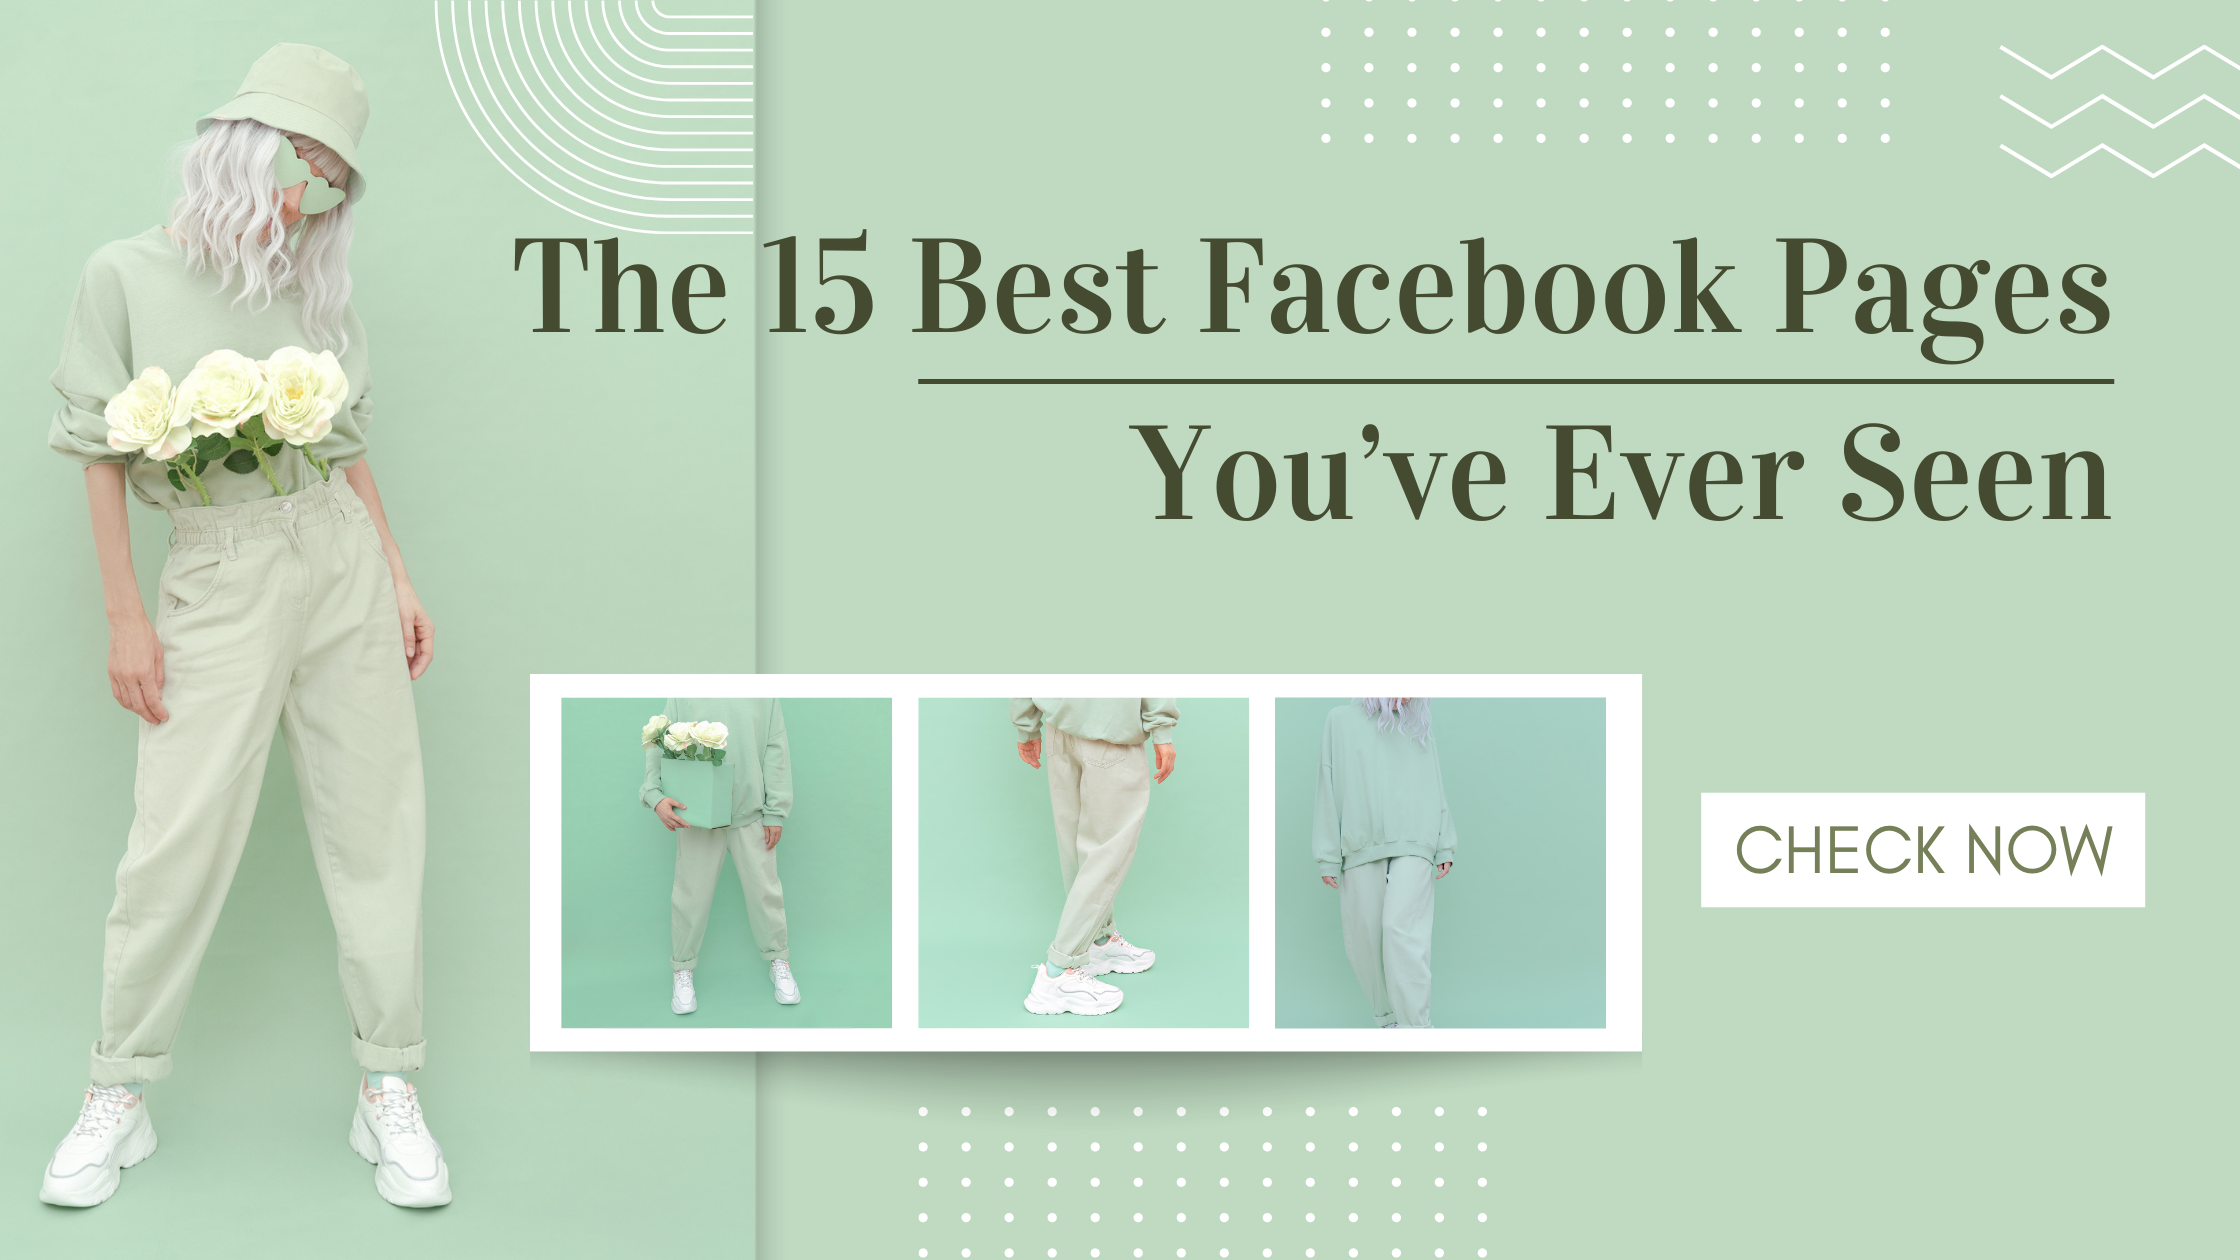 You are currently viewing The 15 Best Facebook Pages You’ve Ever Seen